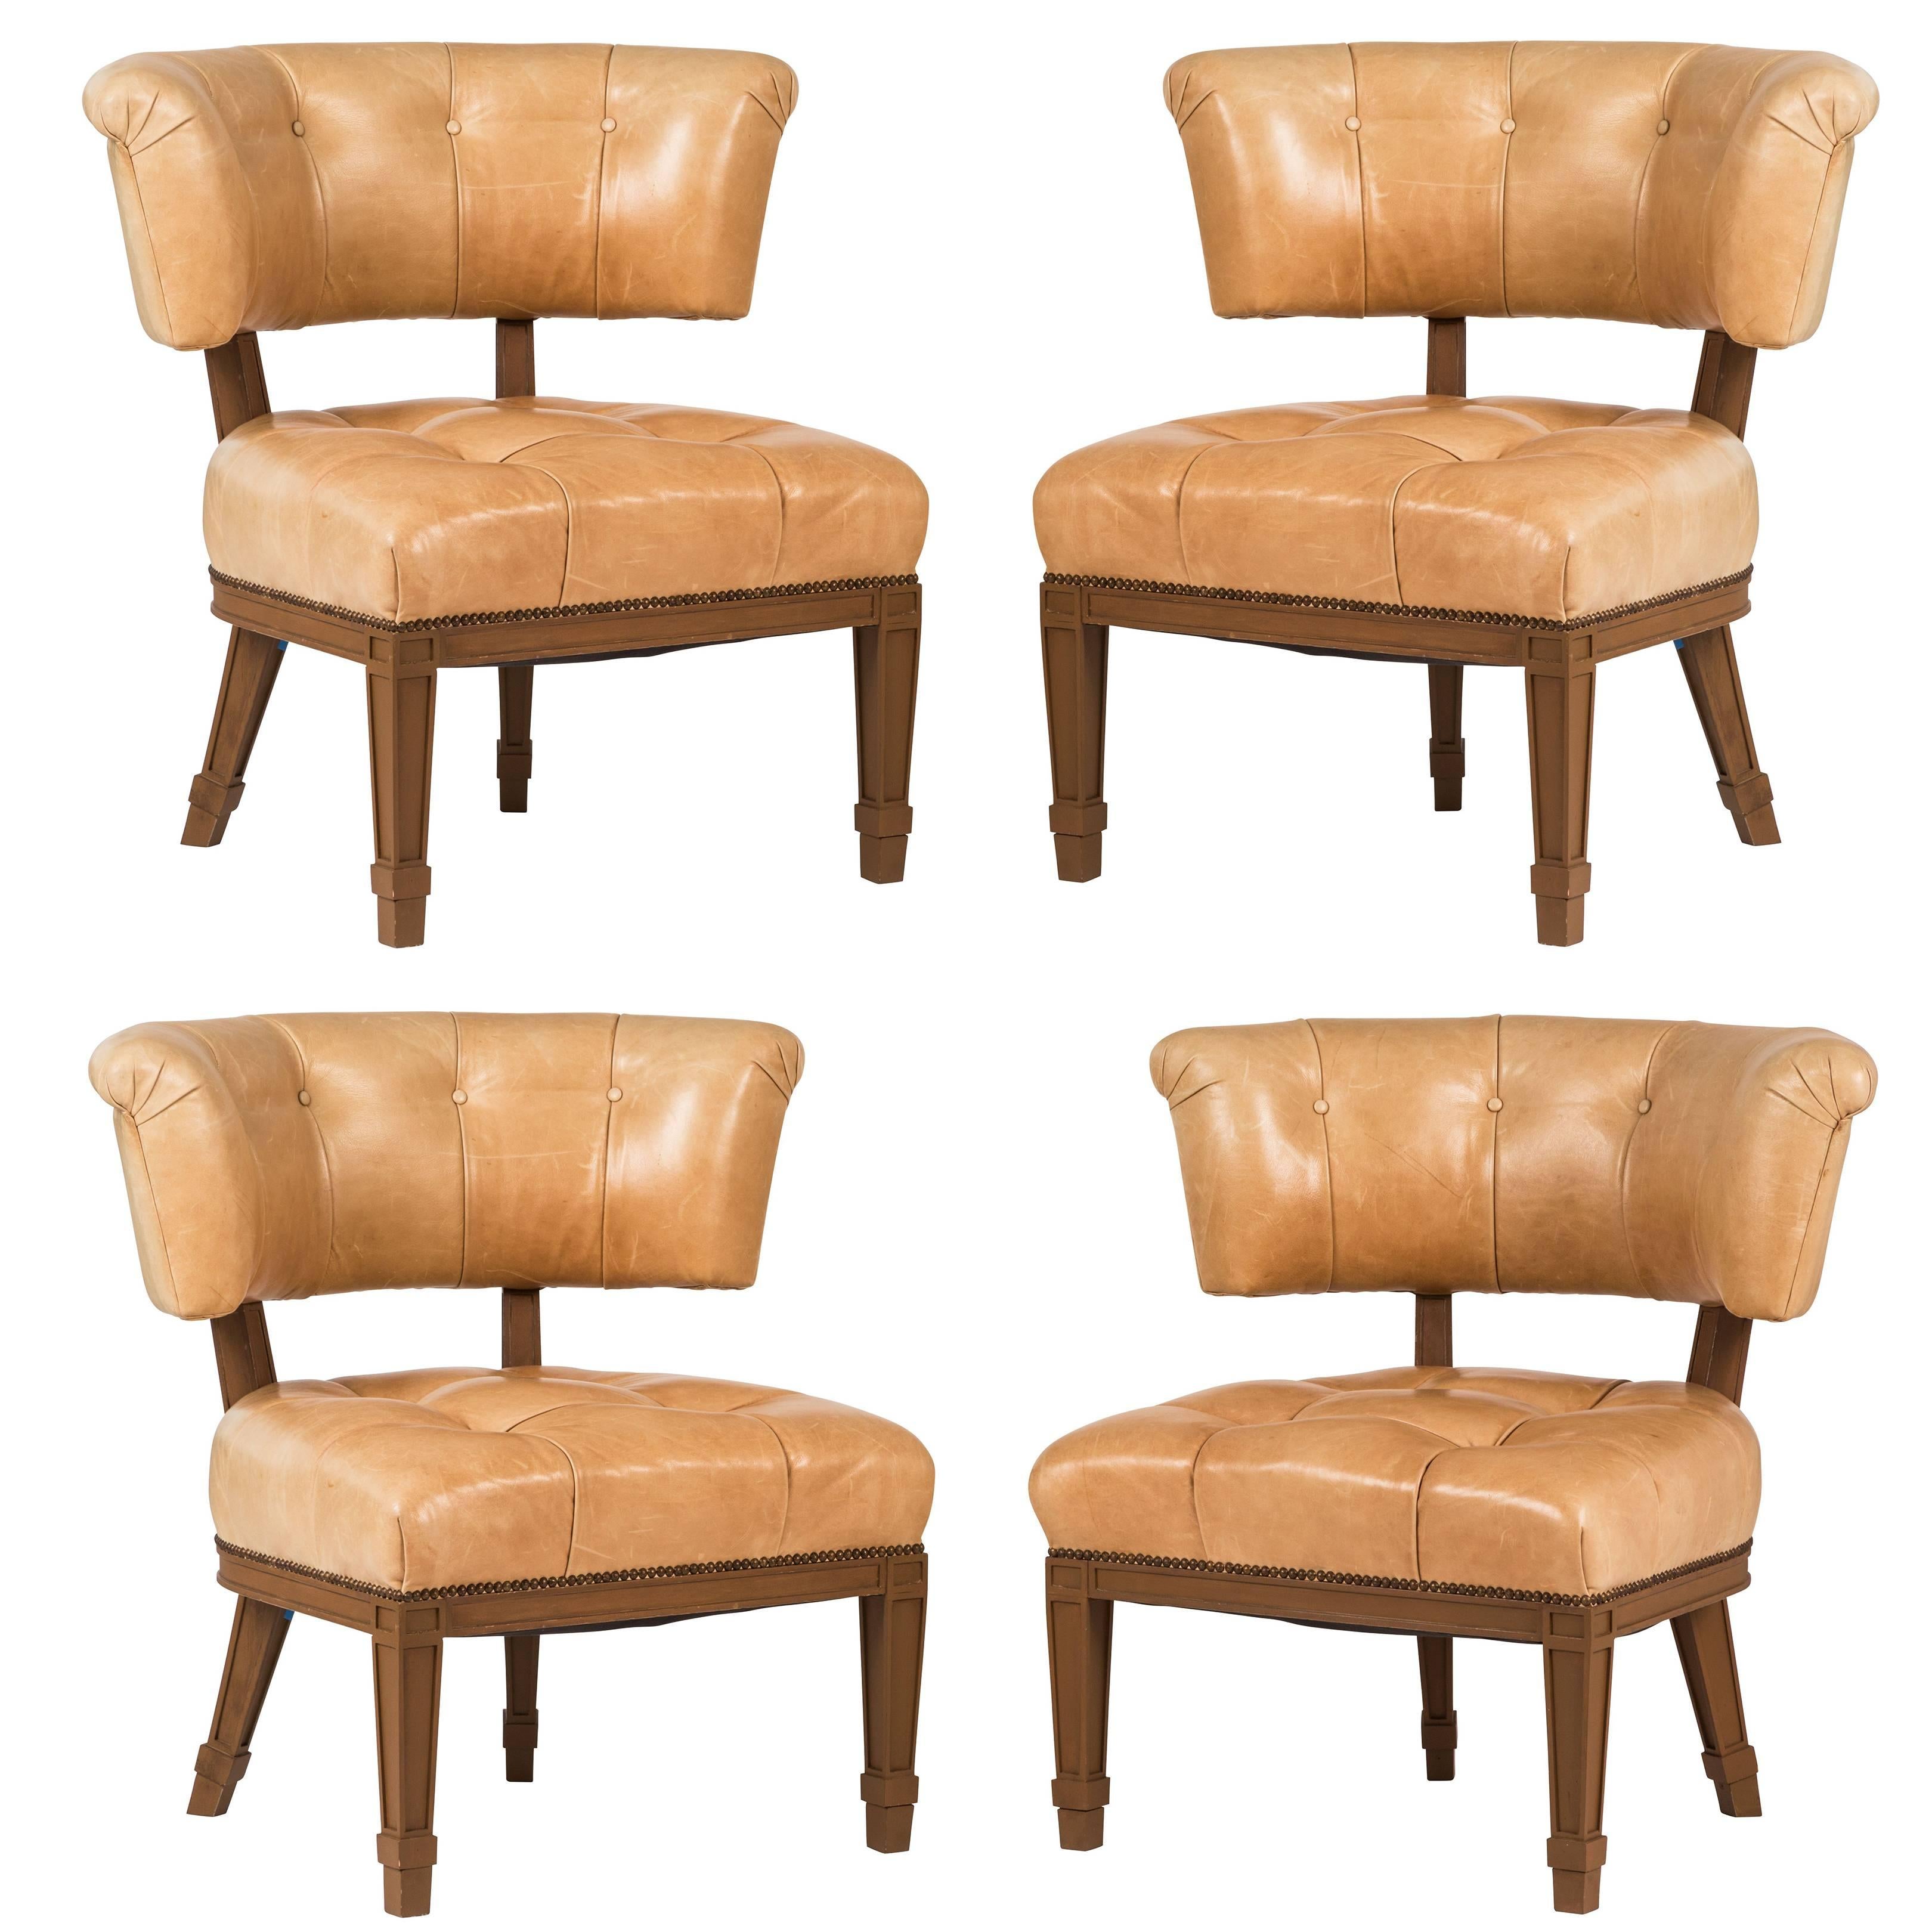 Set of Chairs by William "Billy" Haines